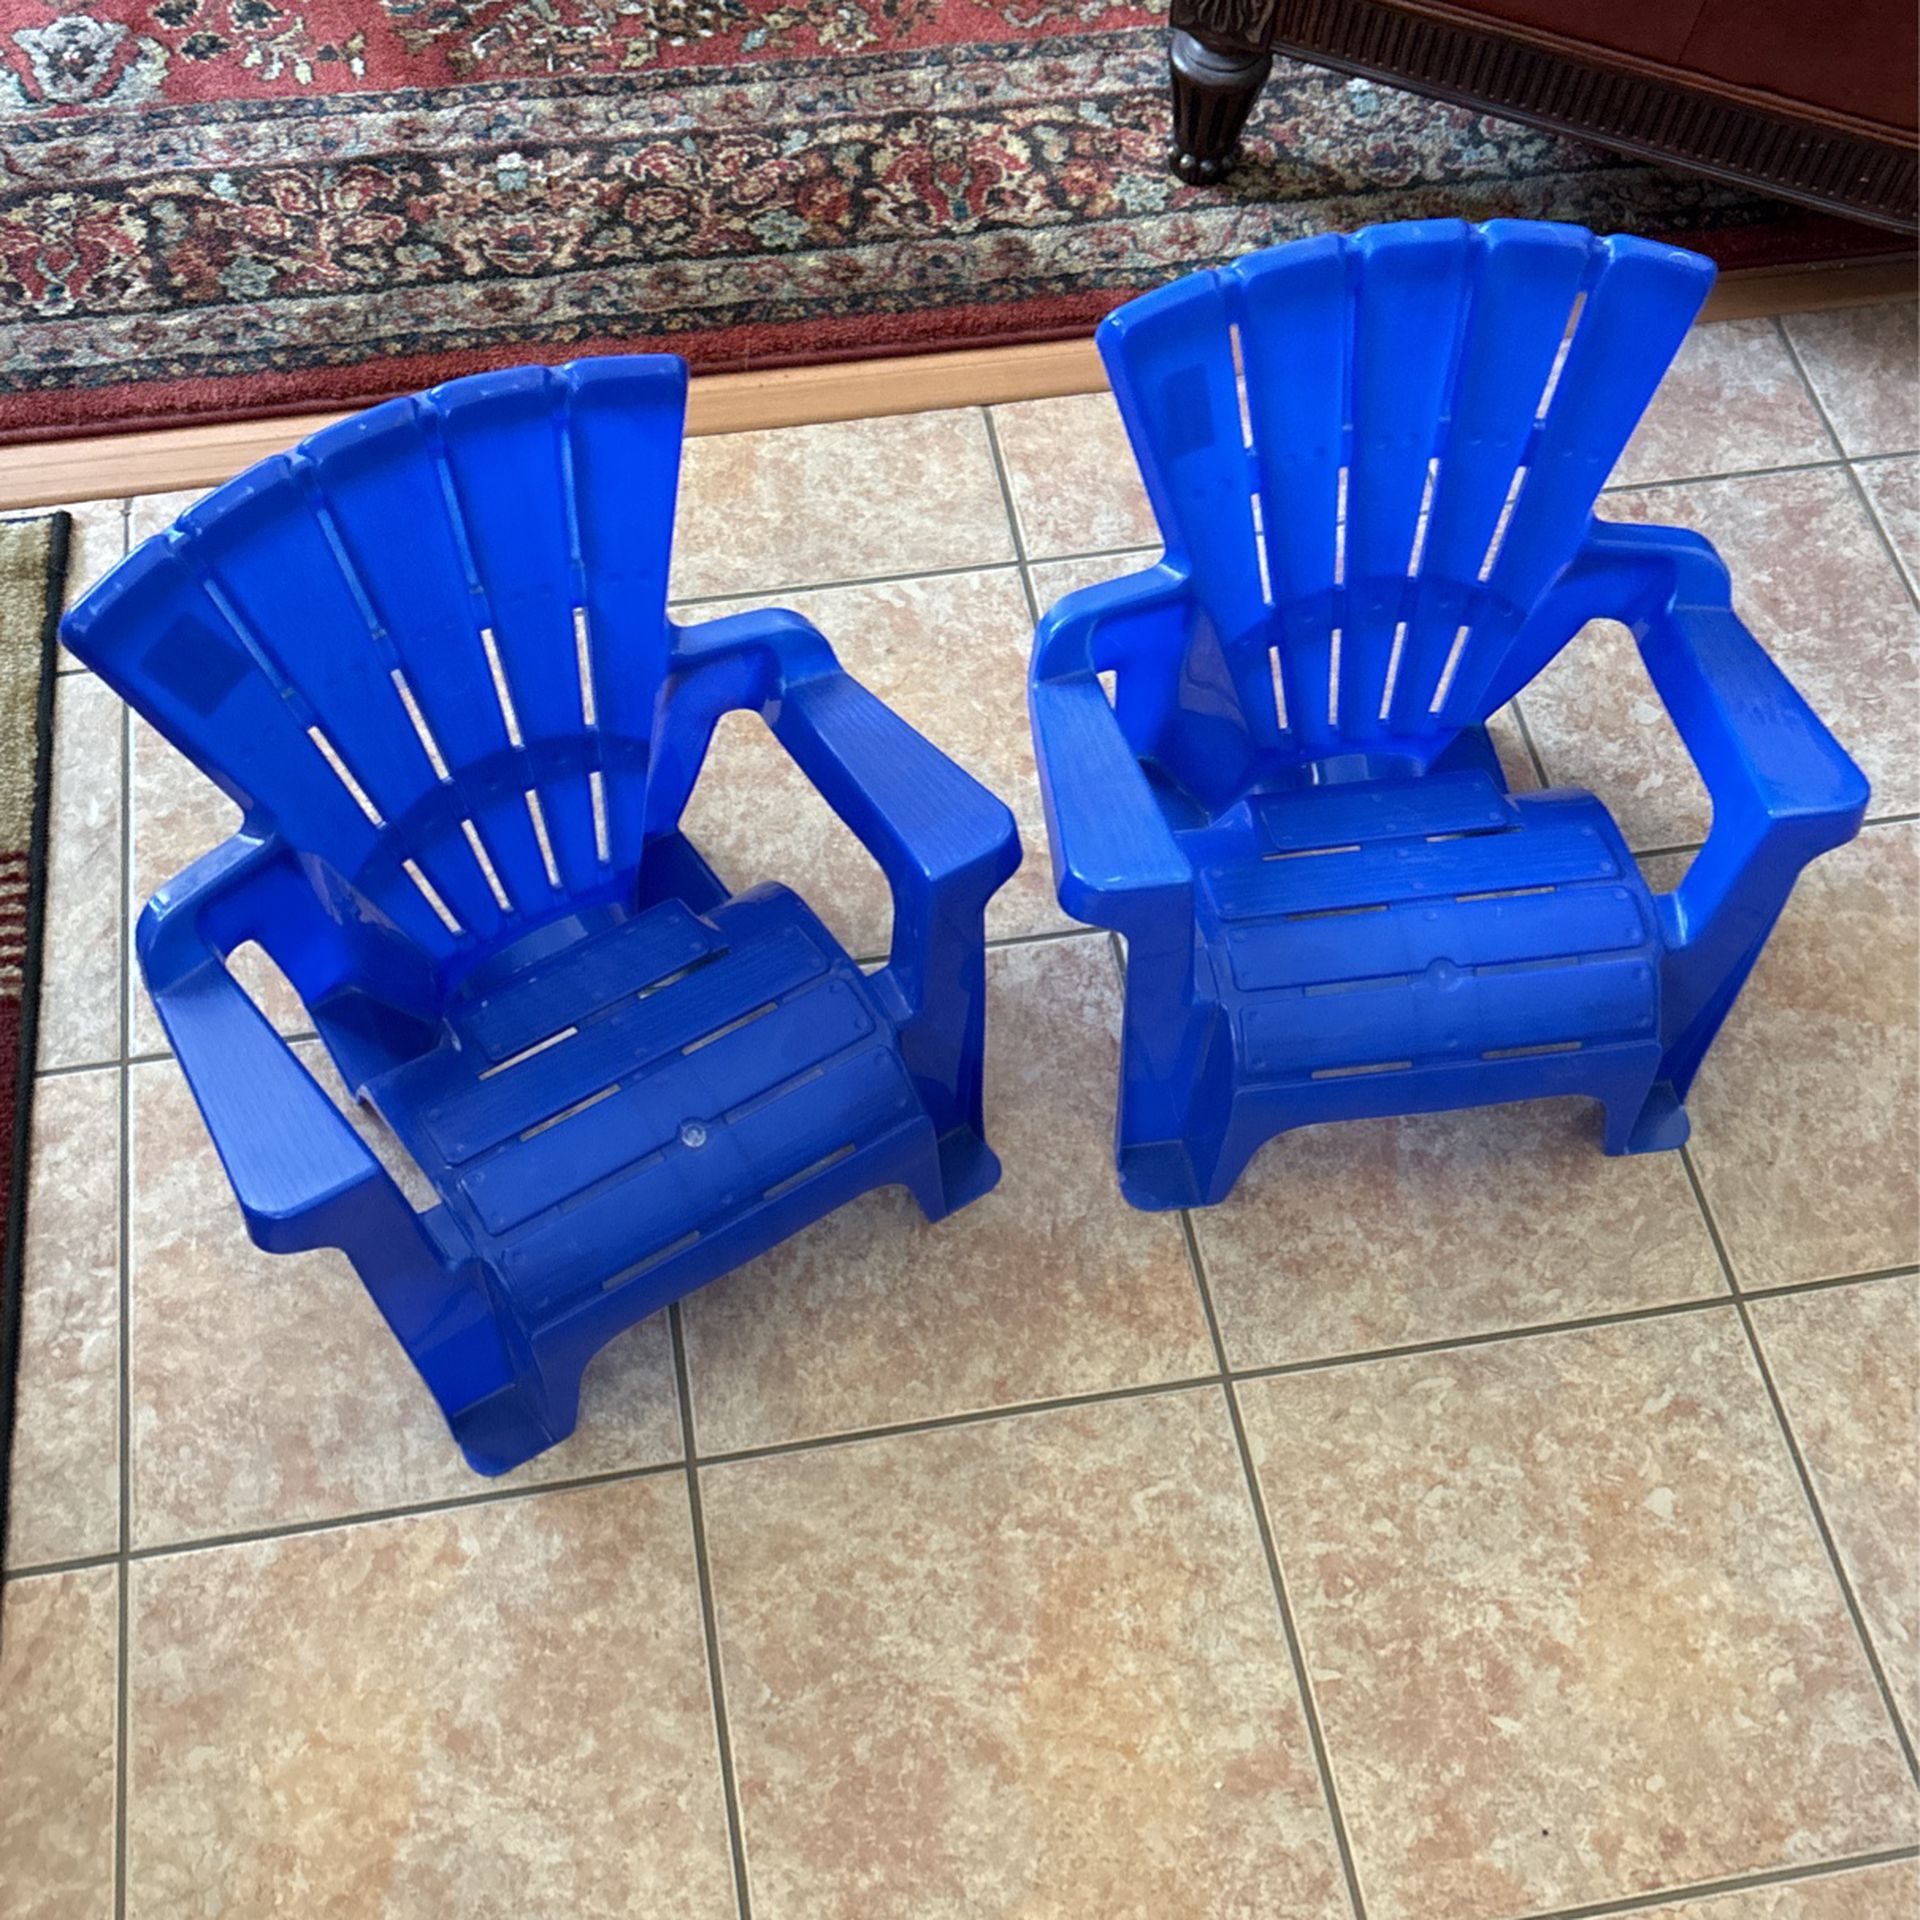 Two Chairs For Kids